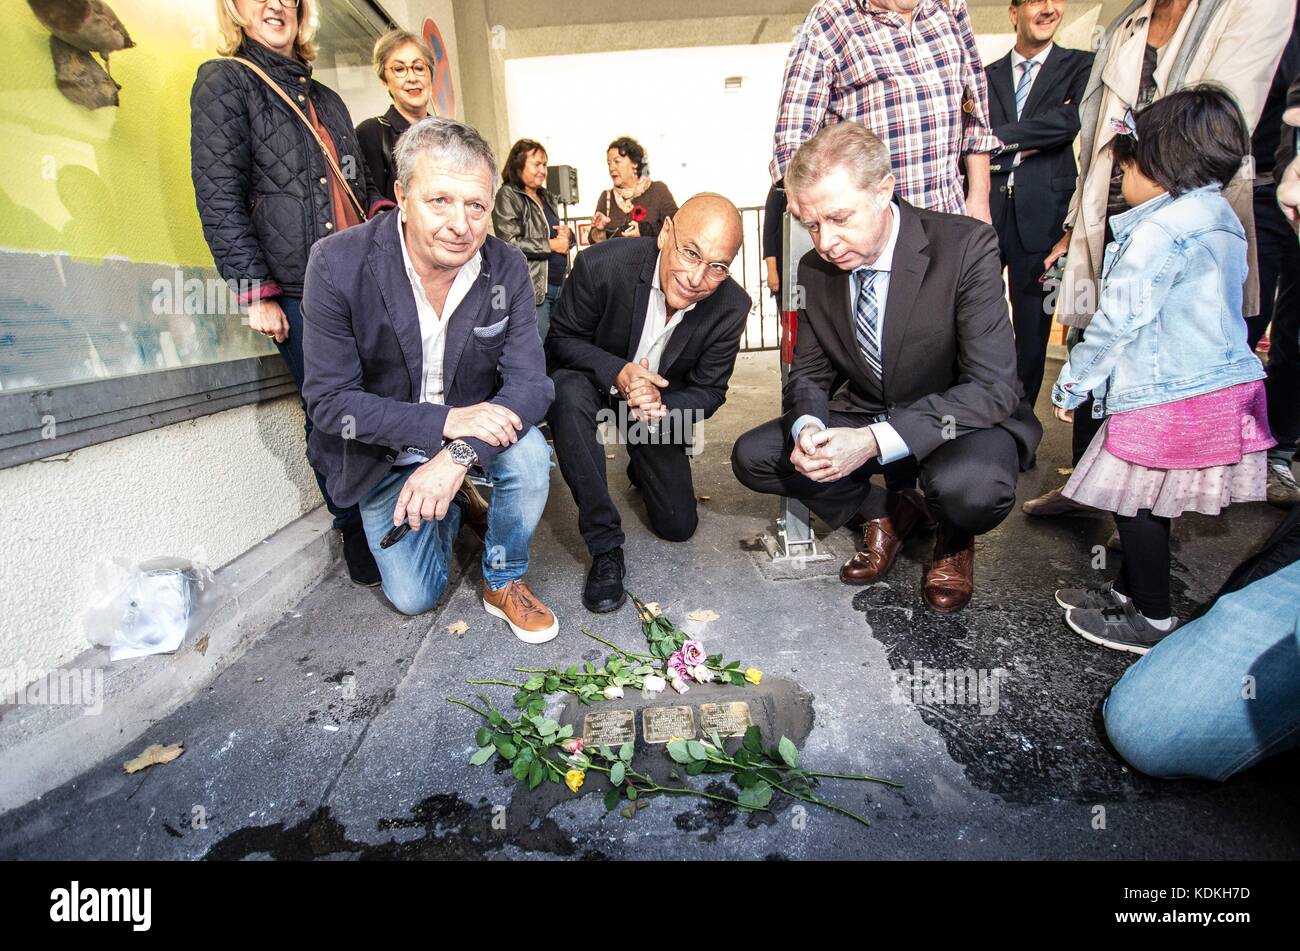 Munich, Bavaria, Germany. 14th Oct, 2017. Terry Swartzberg. Despite lengthy battles, the so-called Stolpersteine ('Stumbling Blocks'') containing the names & information of victims of National Socialism were installed at four different sites in Munich. The City of Munich forbid the installation of the memorial stones on public ground in 2015, which led the Stolpersteine Initiative (''˜Stumbling Block Initiative'') to seek private properties to install them. To date, 61,000 Stolpersteine in 2,000 cities in 21 countries have been dedicated, with much criticism lobbed against Munich's Stock Photo